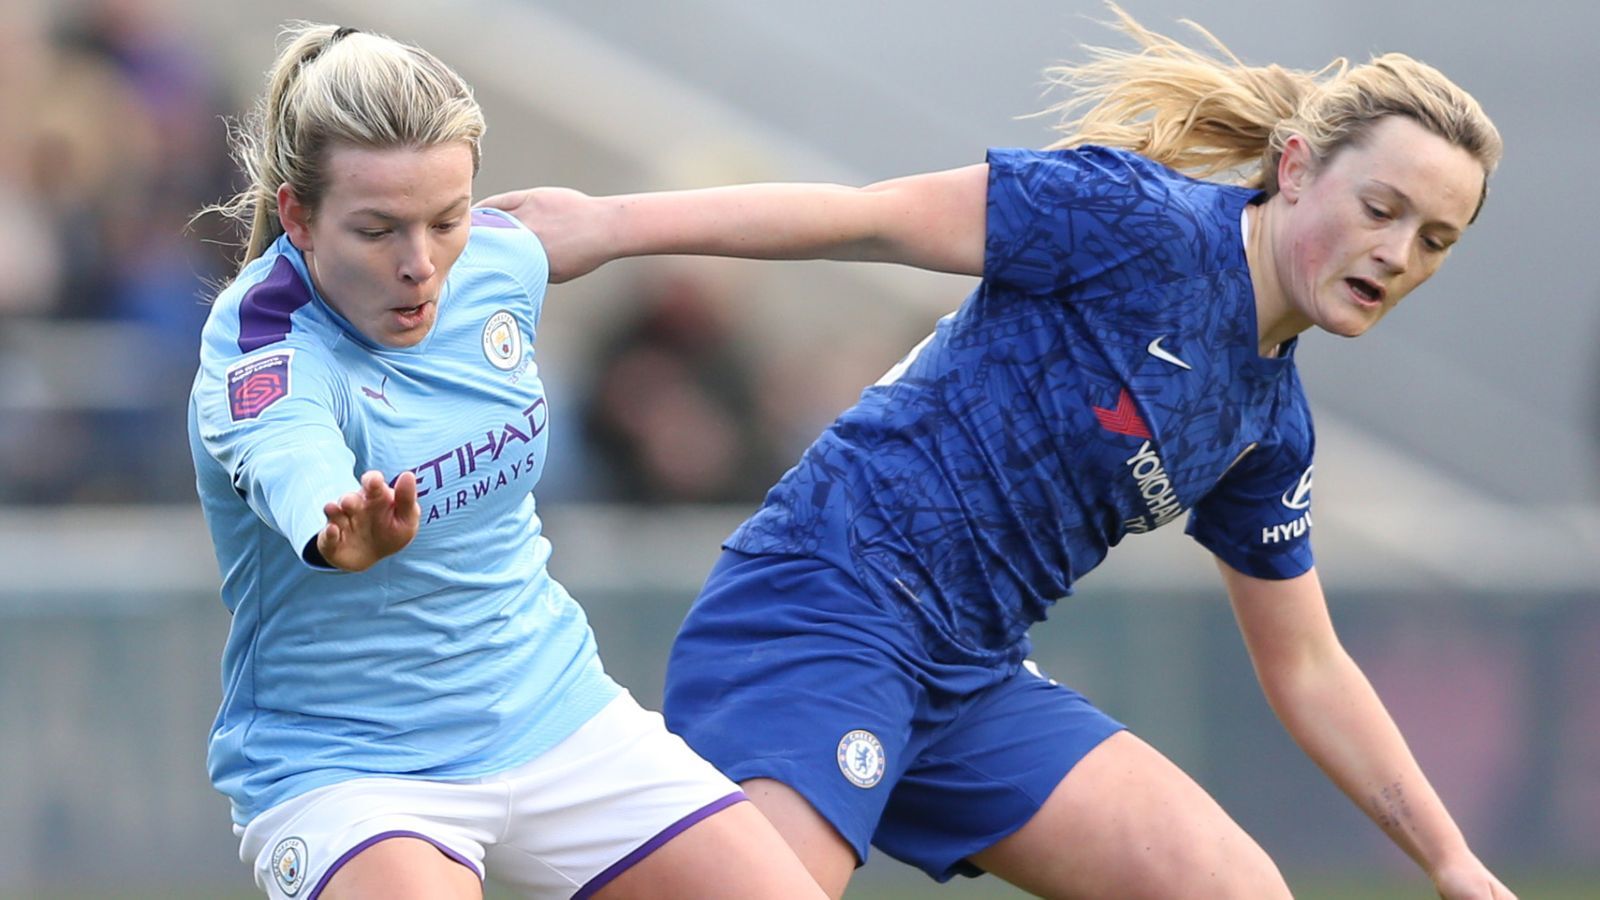 Chelsea Crowned as Champions of the 2019-20 FA Women’s Super League